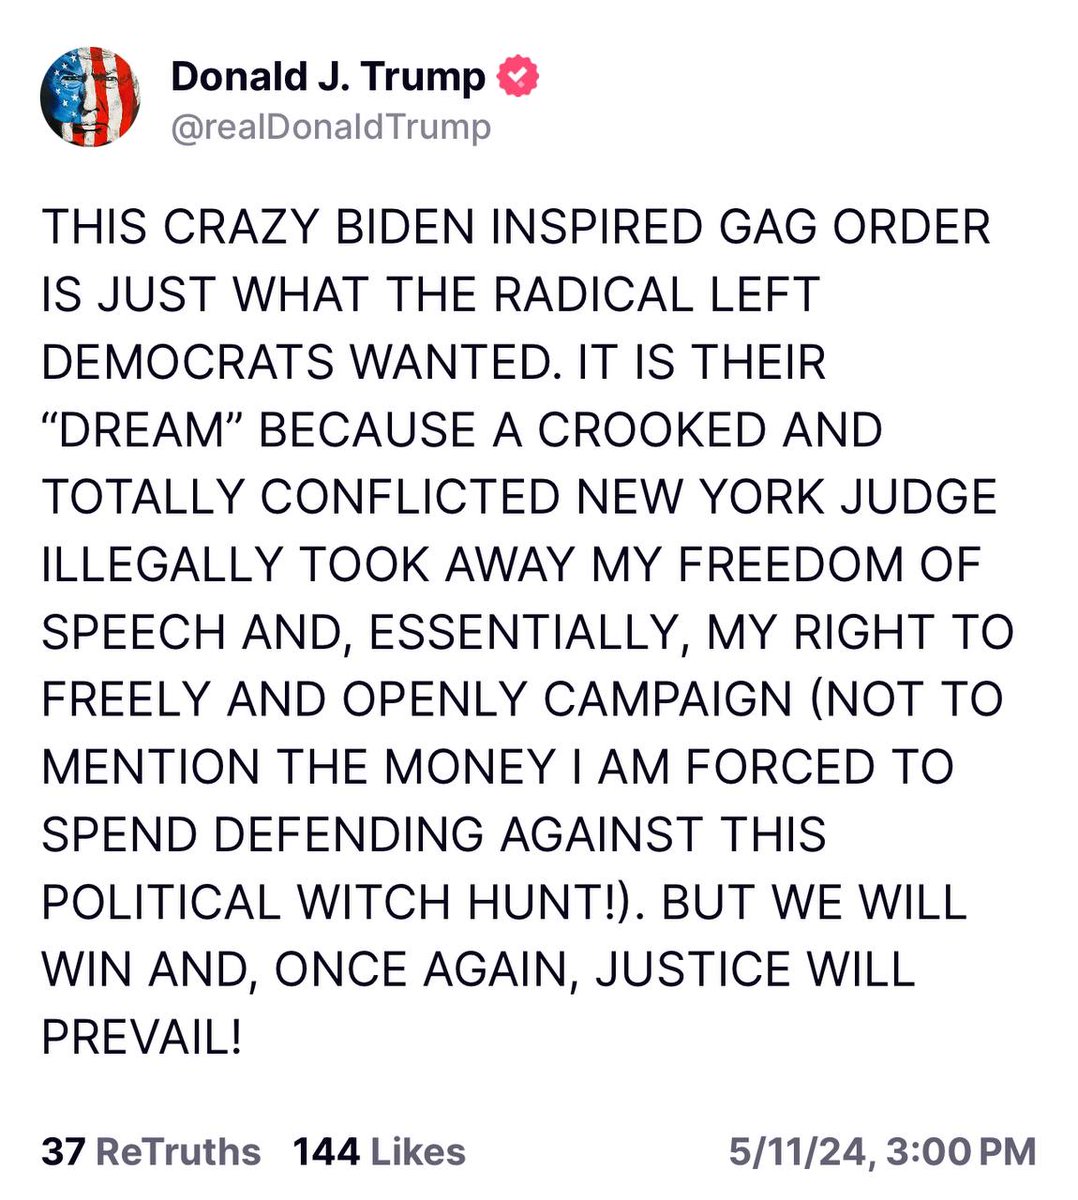 President Trump: 'BUT WE WILL WIN AND, ONCE AGAIN, JUSTICE WILL PREVAIL!'